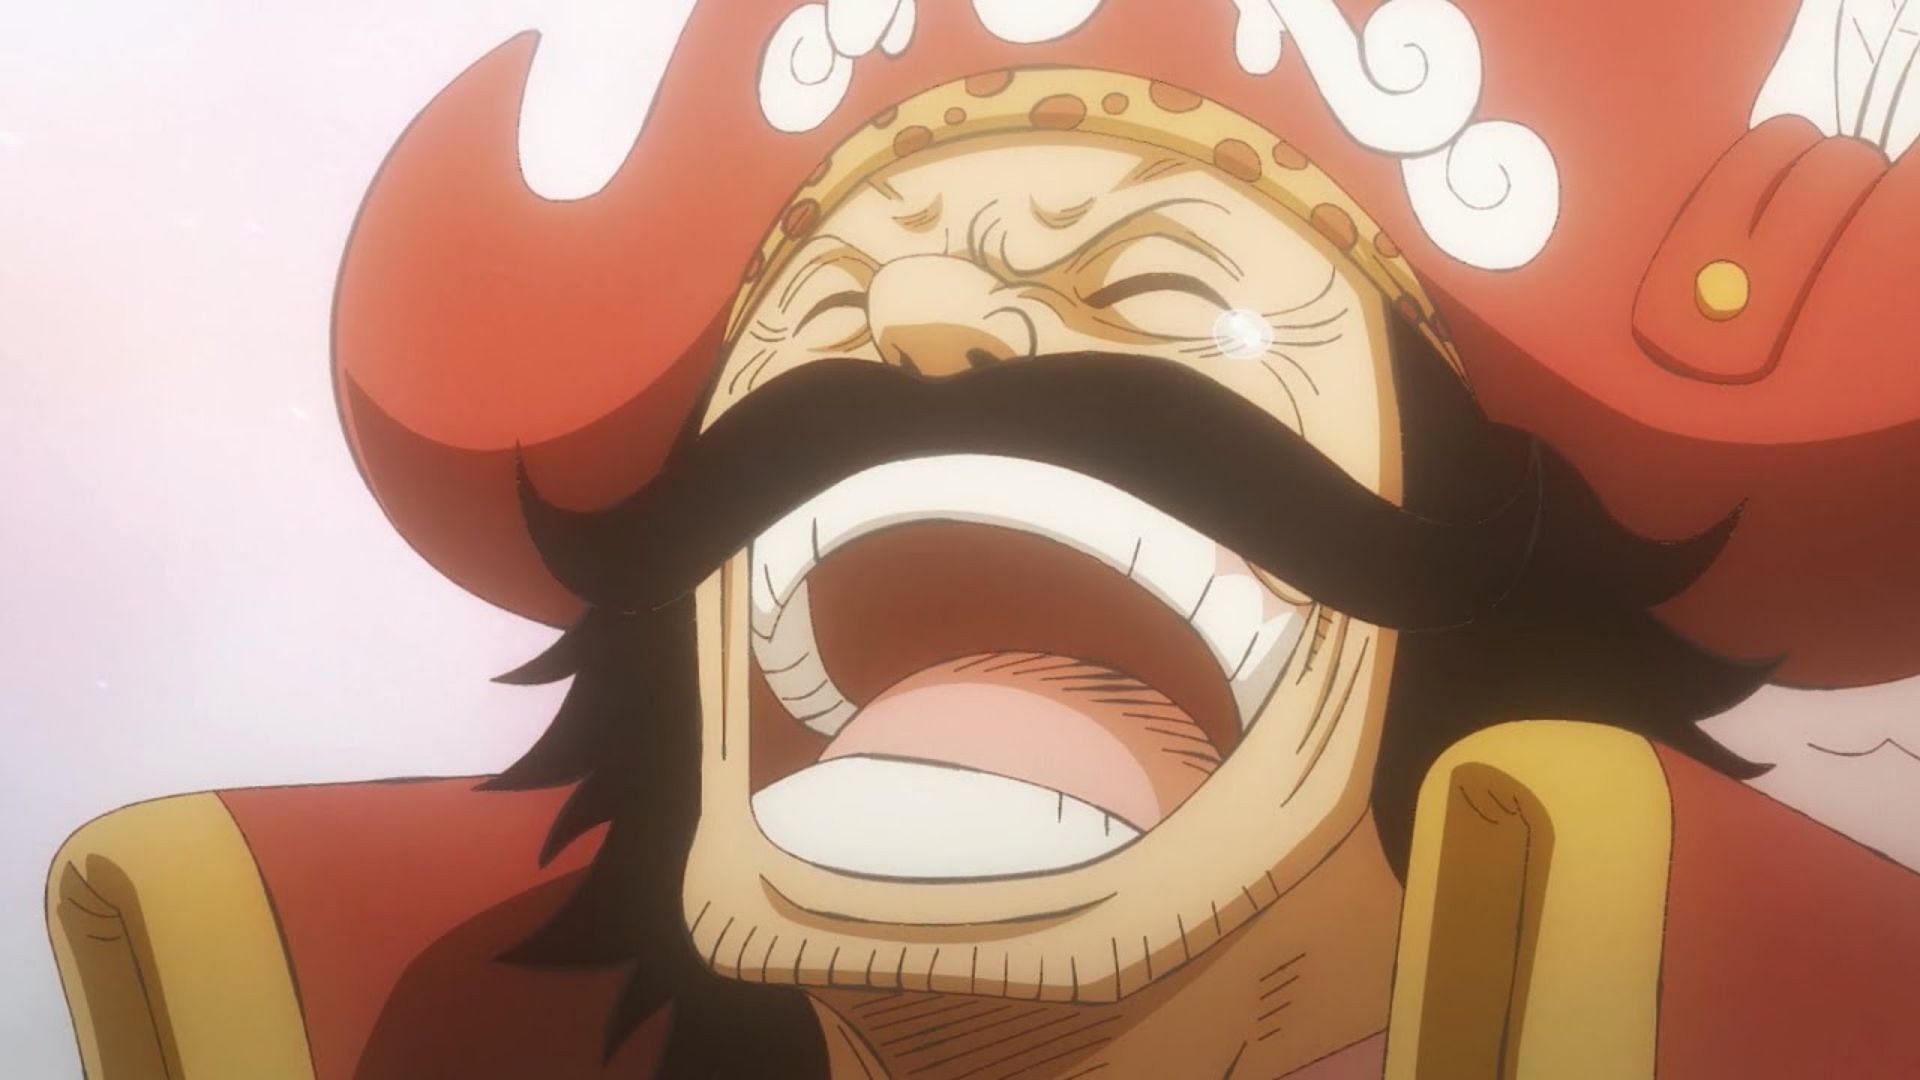 Gol D. Roger laughs after learning the truth of the world (Image via Toei Animation)